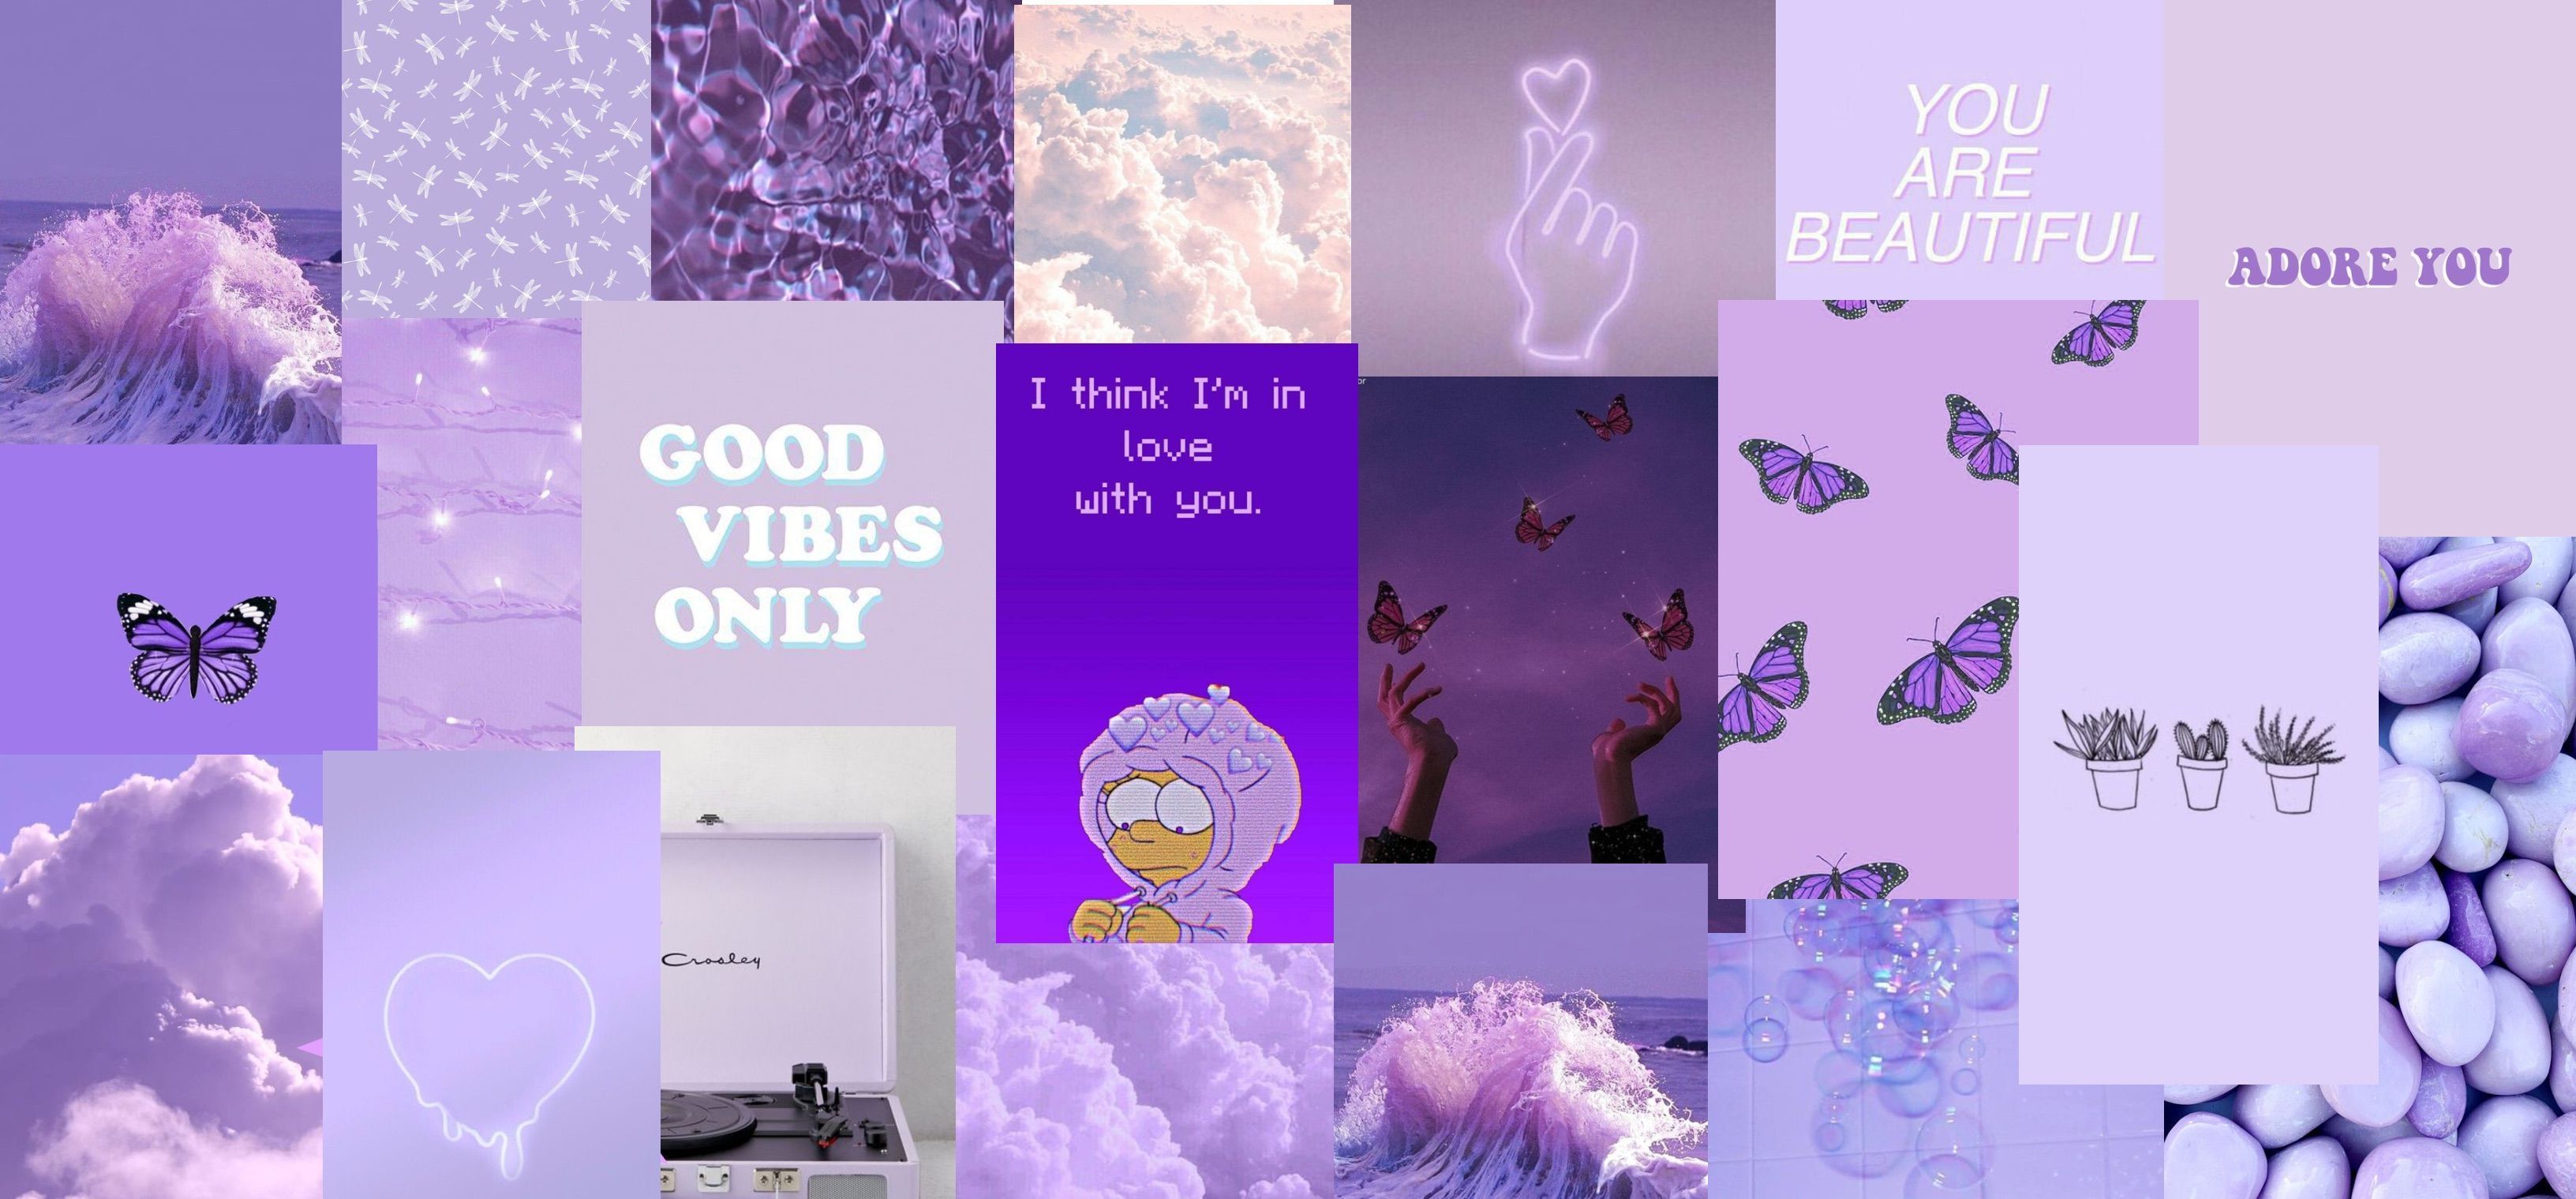 Aesthetic purple background with good vibes only - Lavender